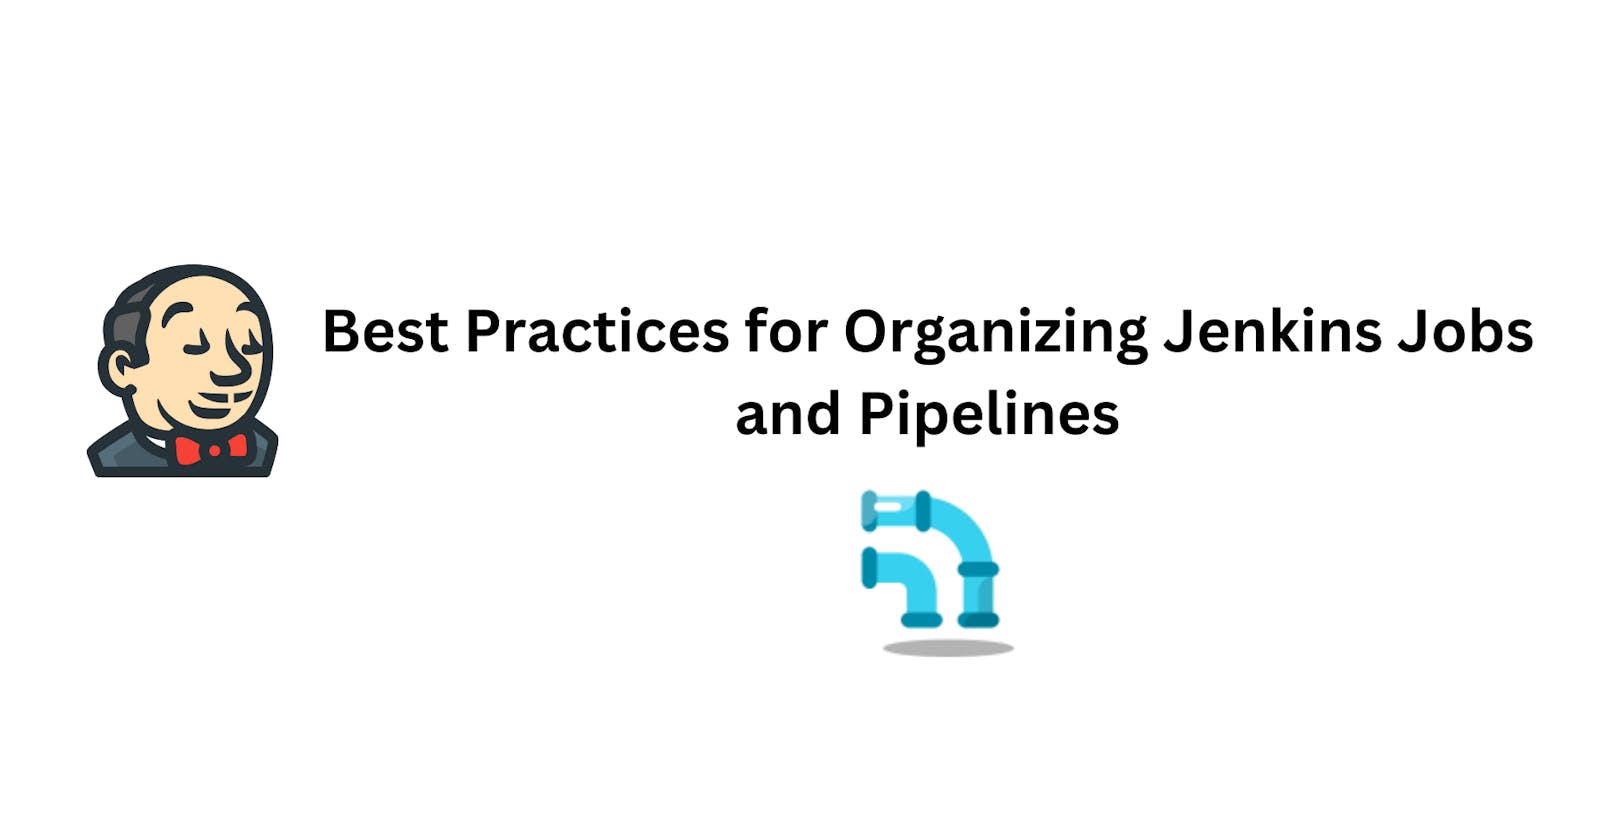 Best Practices for Organizing Jenkins Jobs and Pipelines